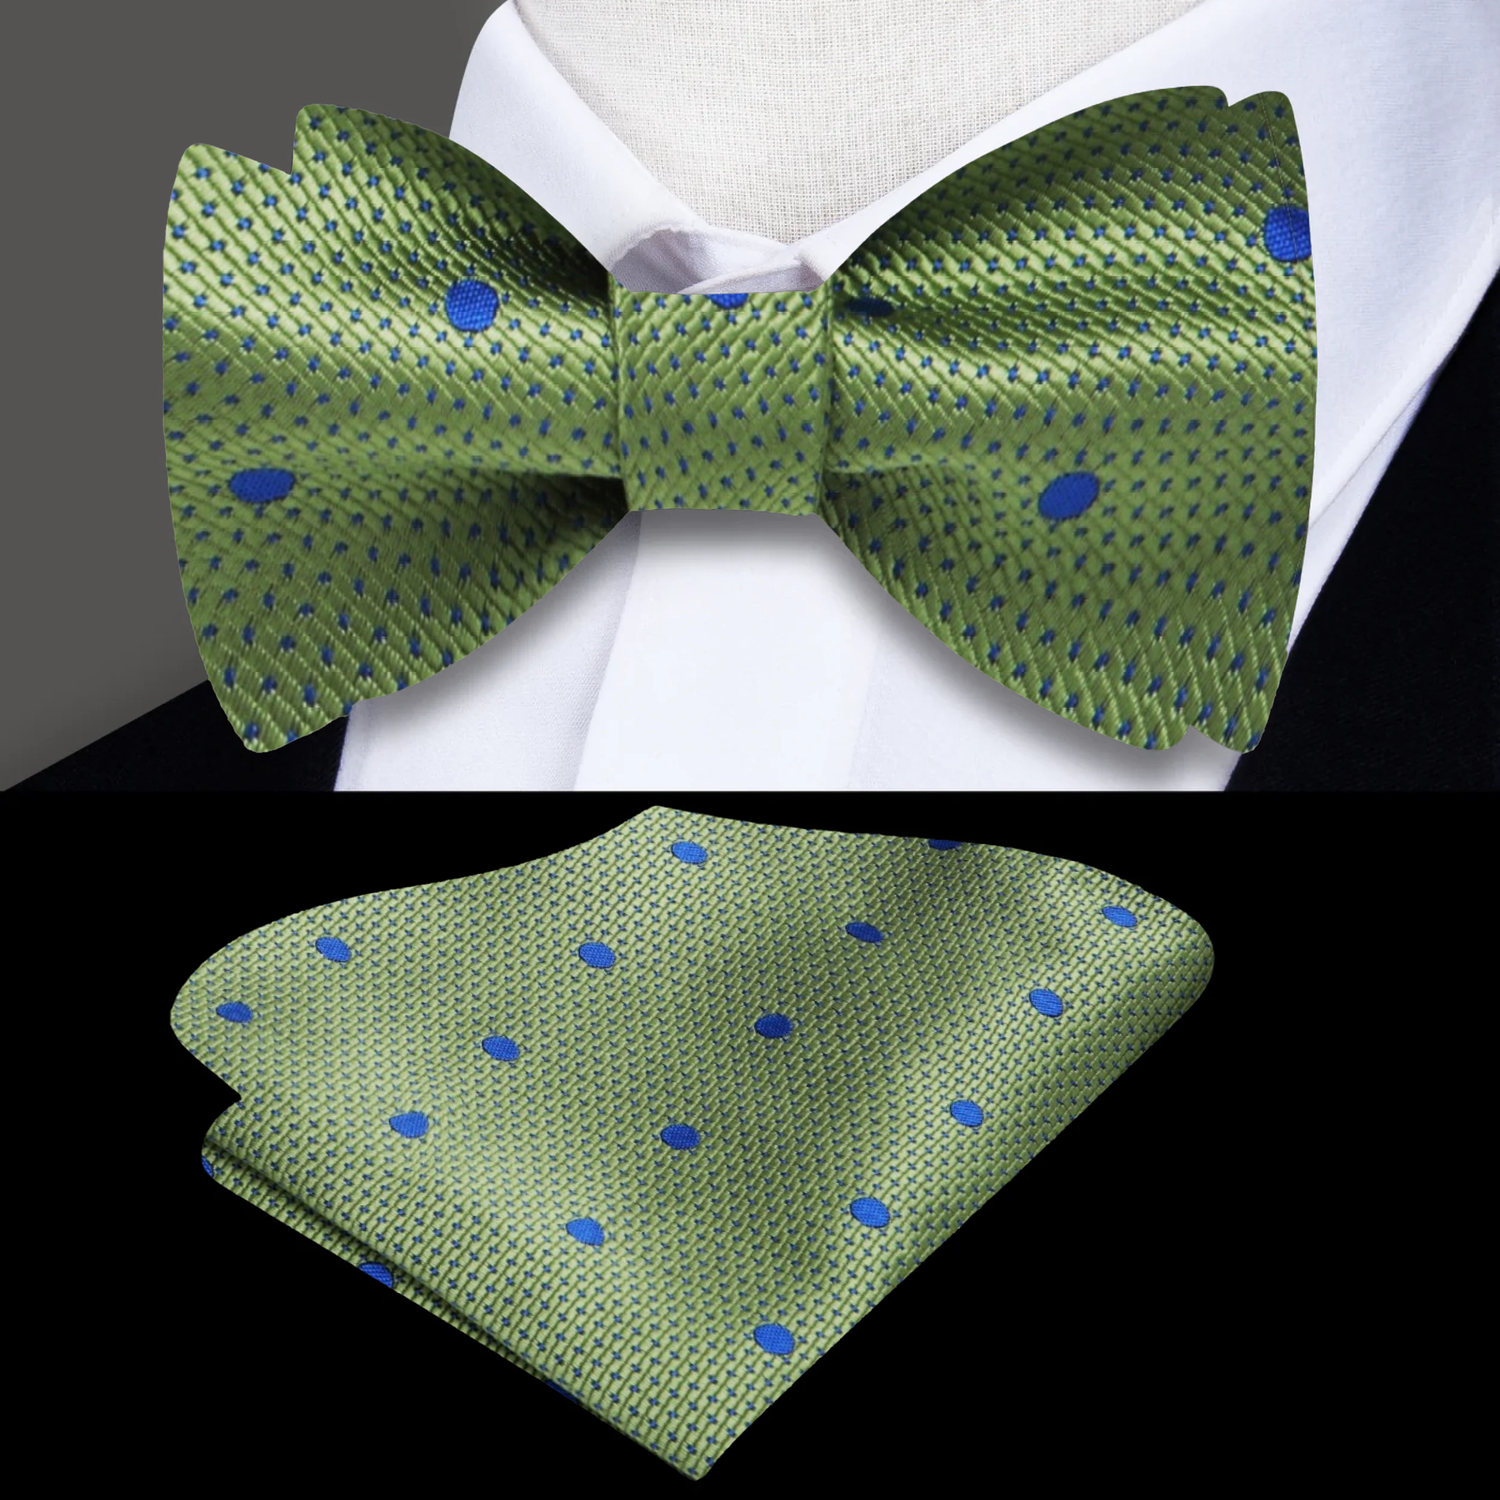 A Green, Blue Polka Dot Pattern Self Tie Bow Tie, Matching Pocket Square